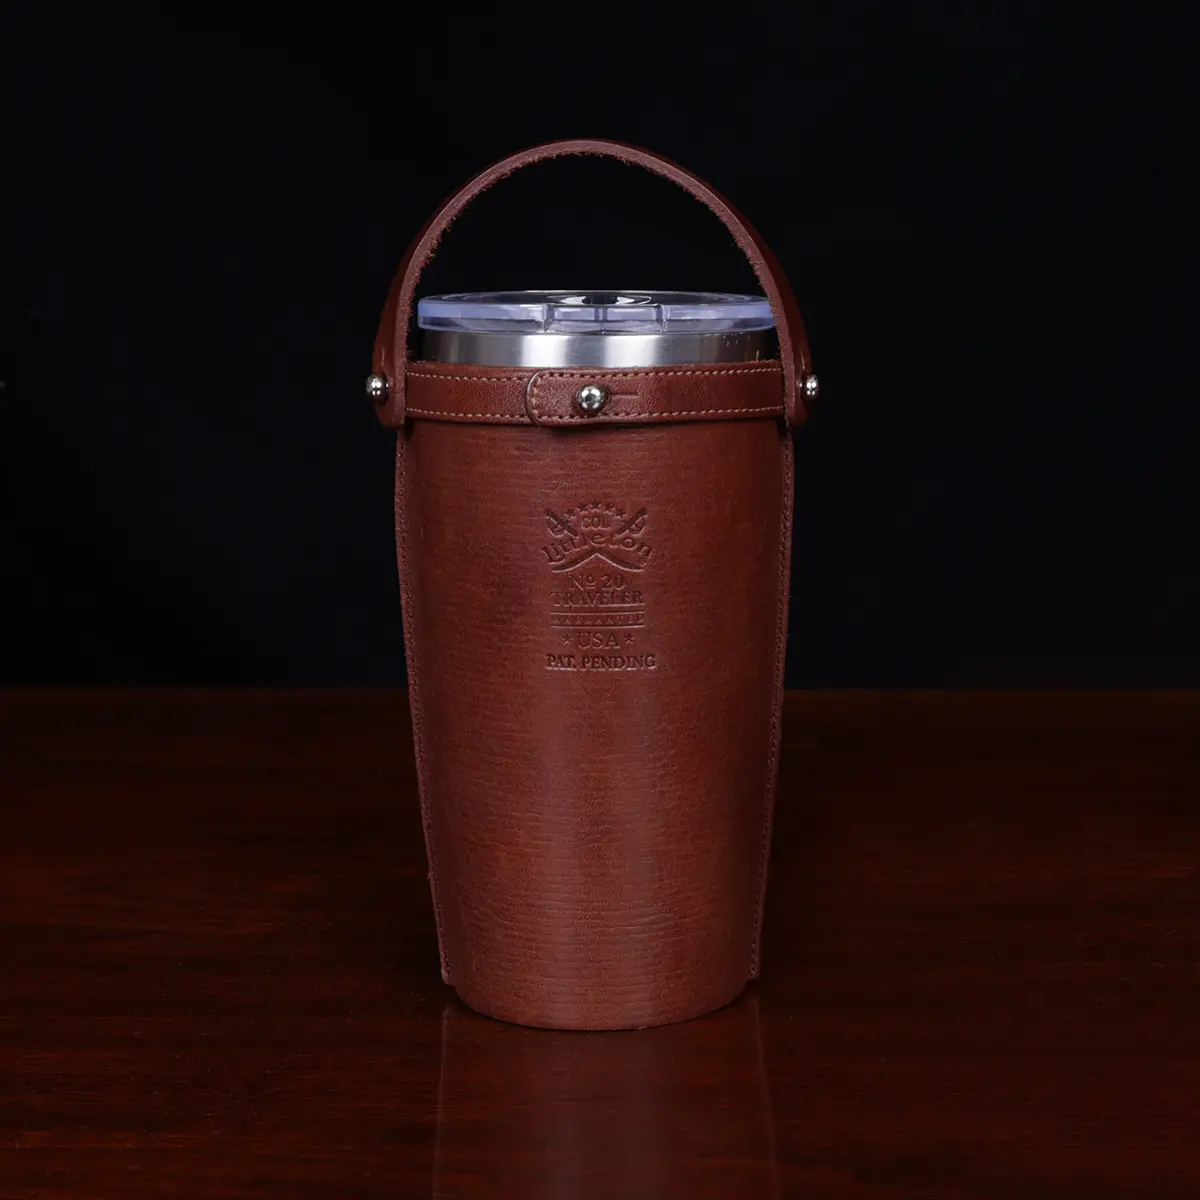 Yeti Rambler Sleeve in Horween Leather - Personalized and Made to Order